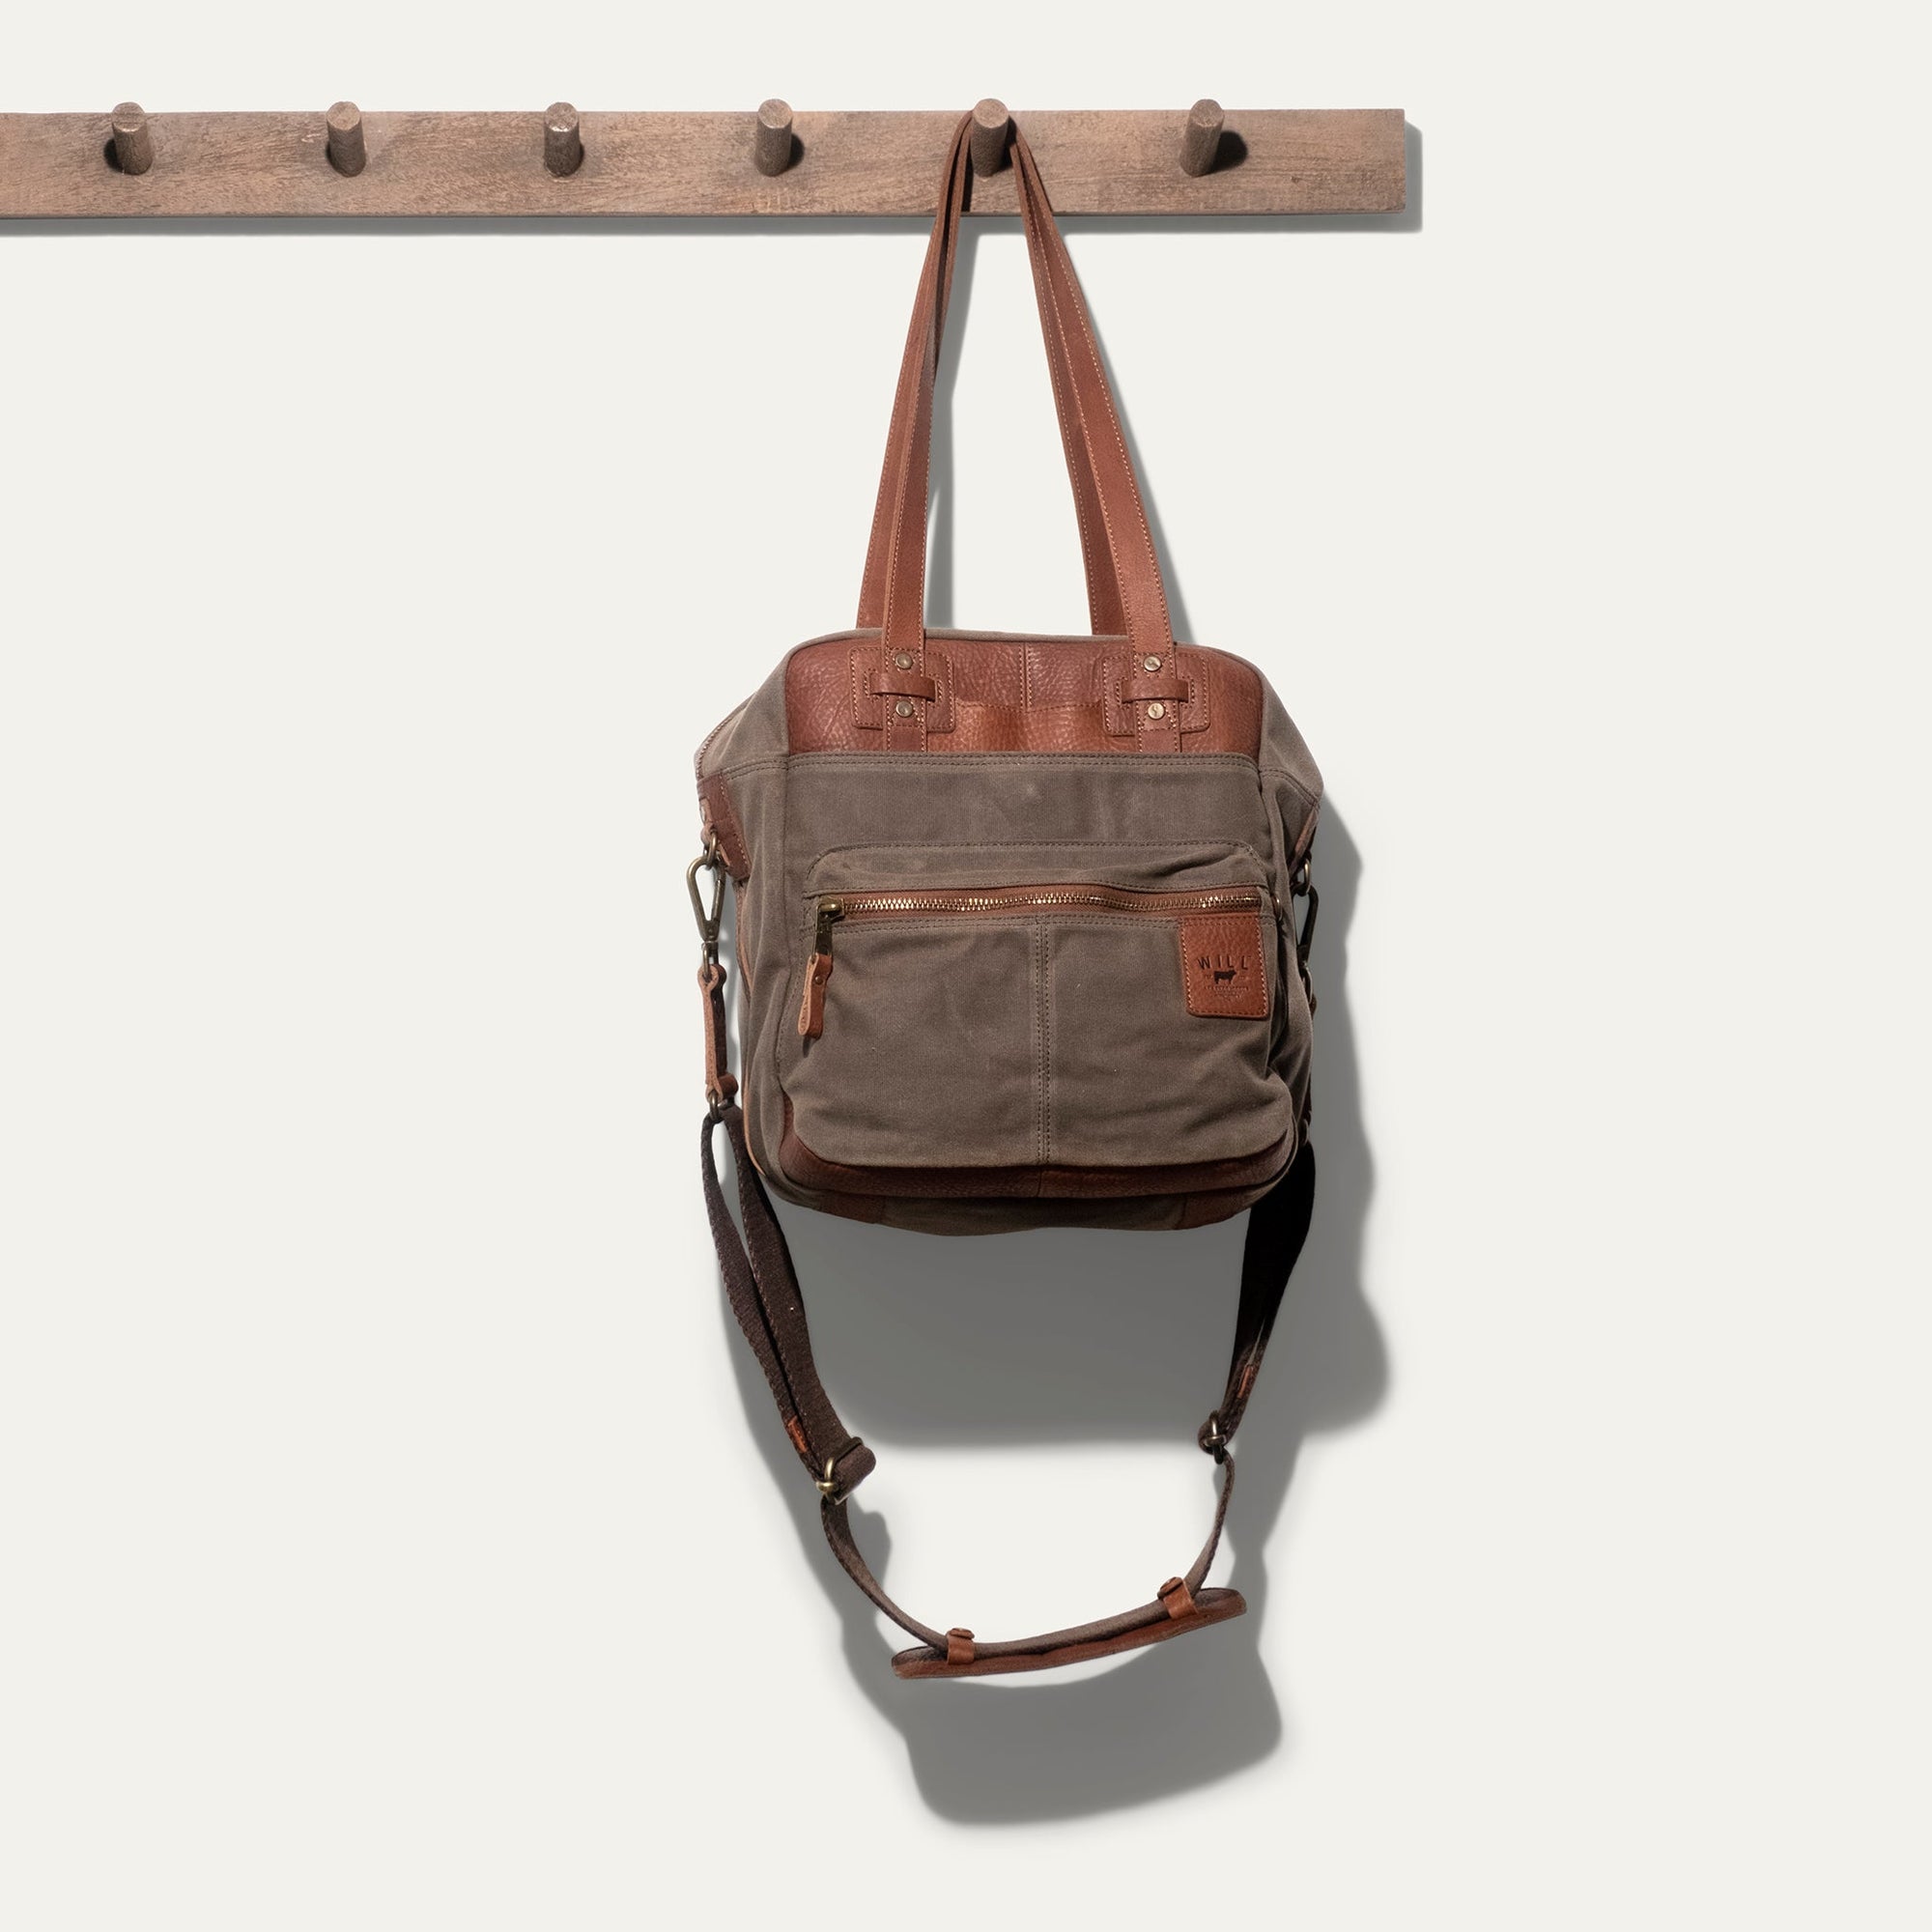 Waxed Canvas and Leather 'Adventure Collection' Onward Tote in Tobacco & Mahogany by Will Leather Goods